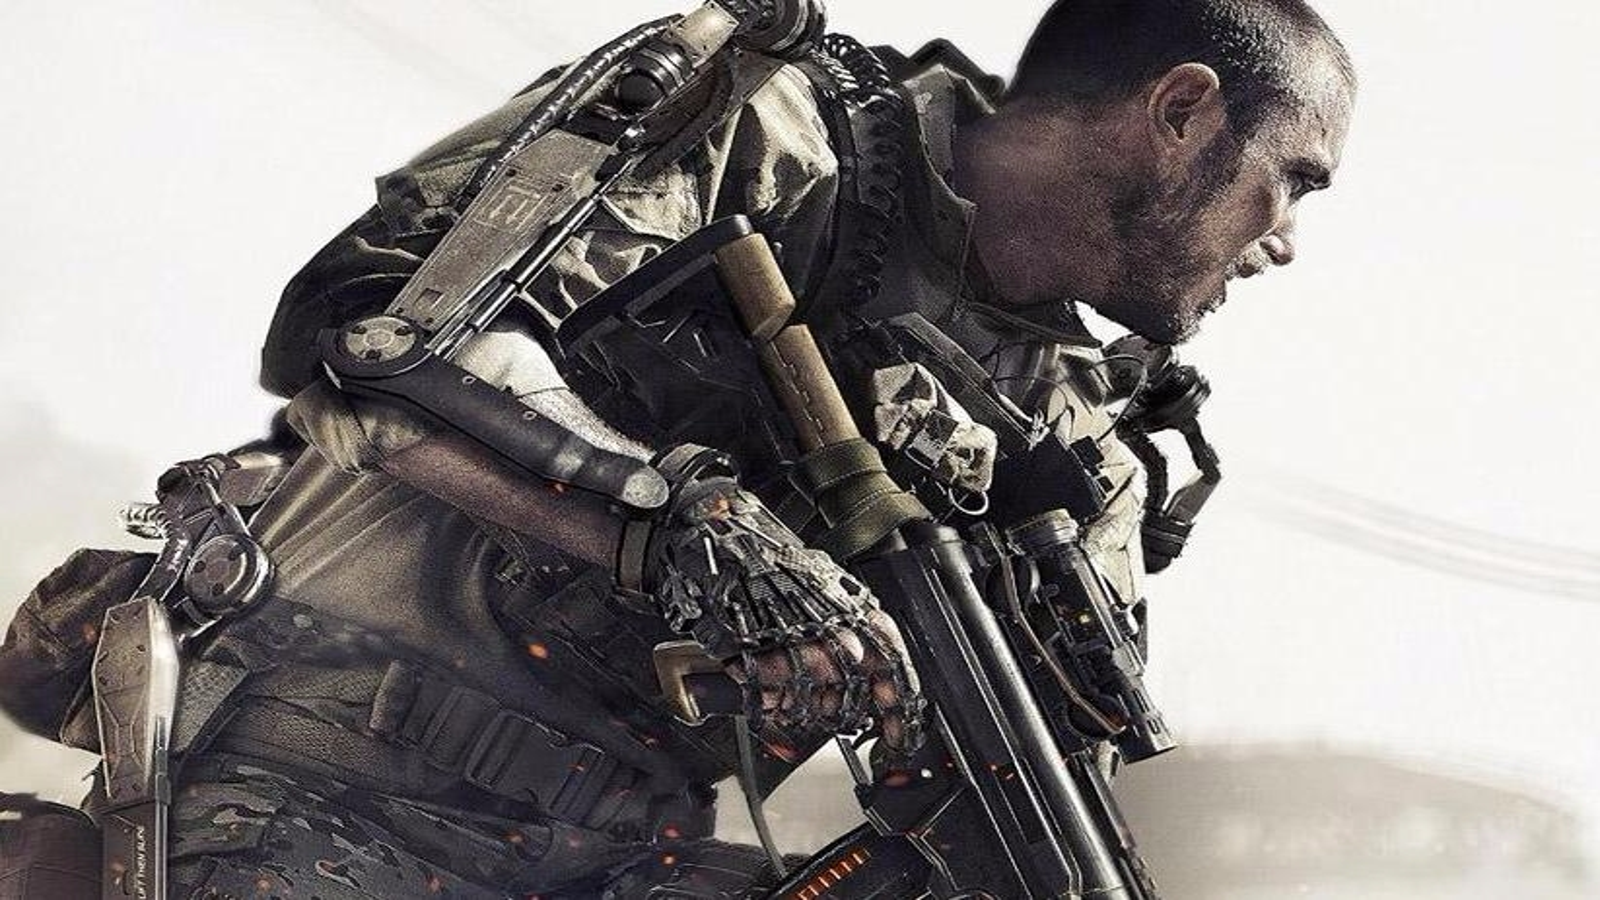 Call of Duty: Advanced Warfare exoskeleton and future tech go on display  in new trailer